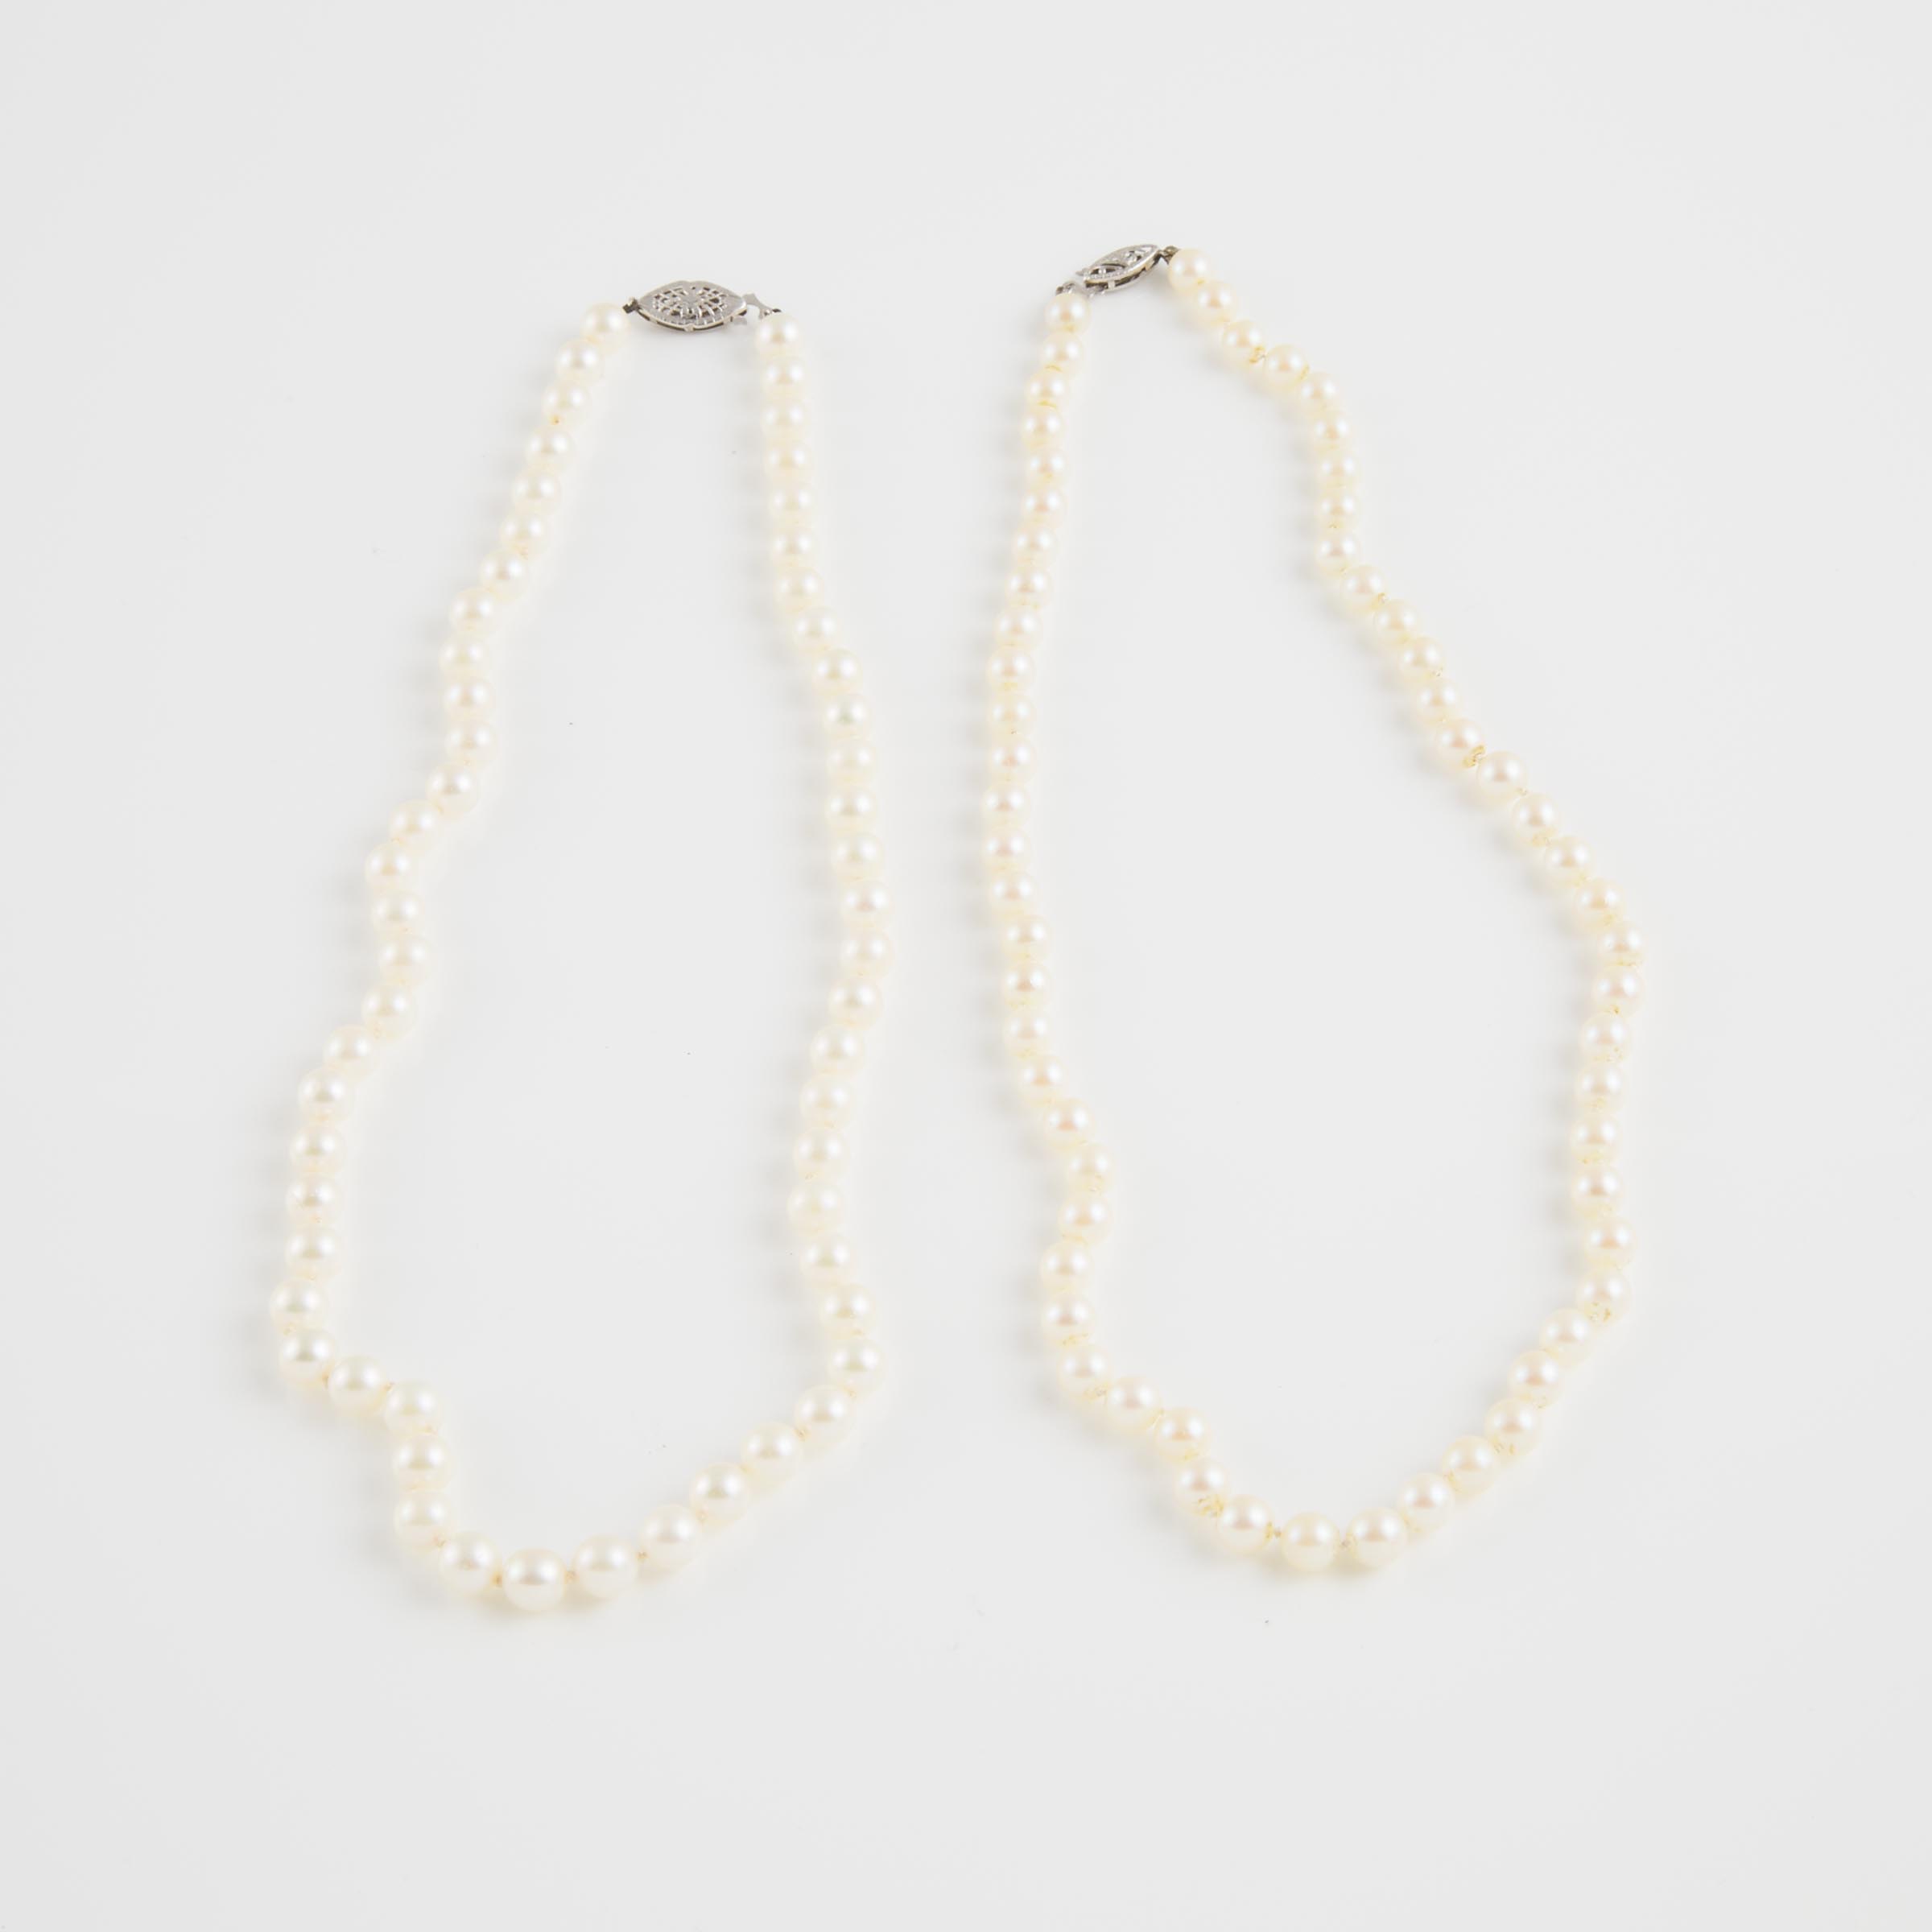 2 Single Strands Of Cultured Pearls